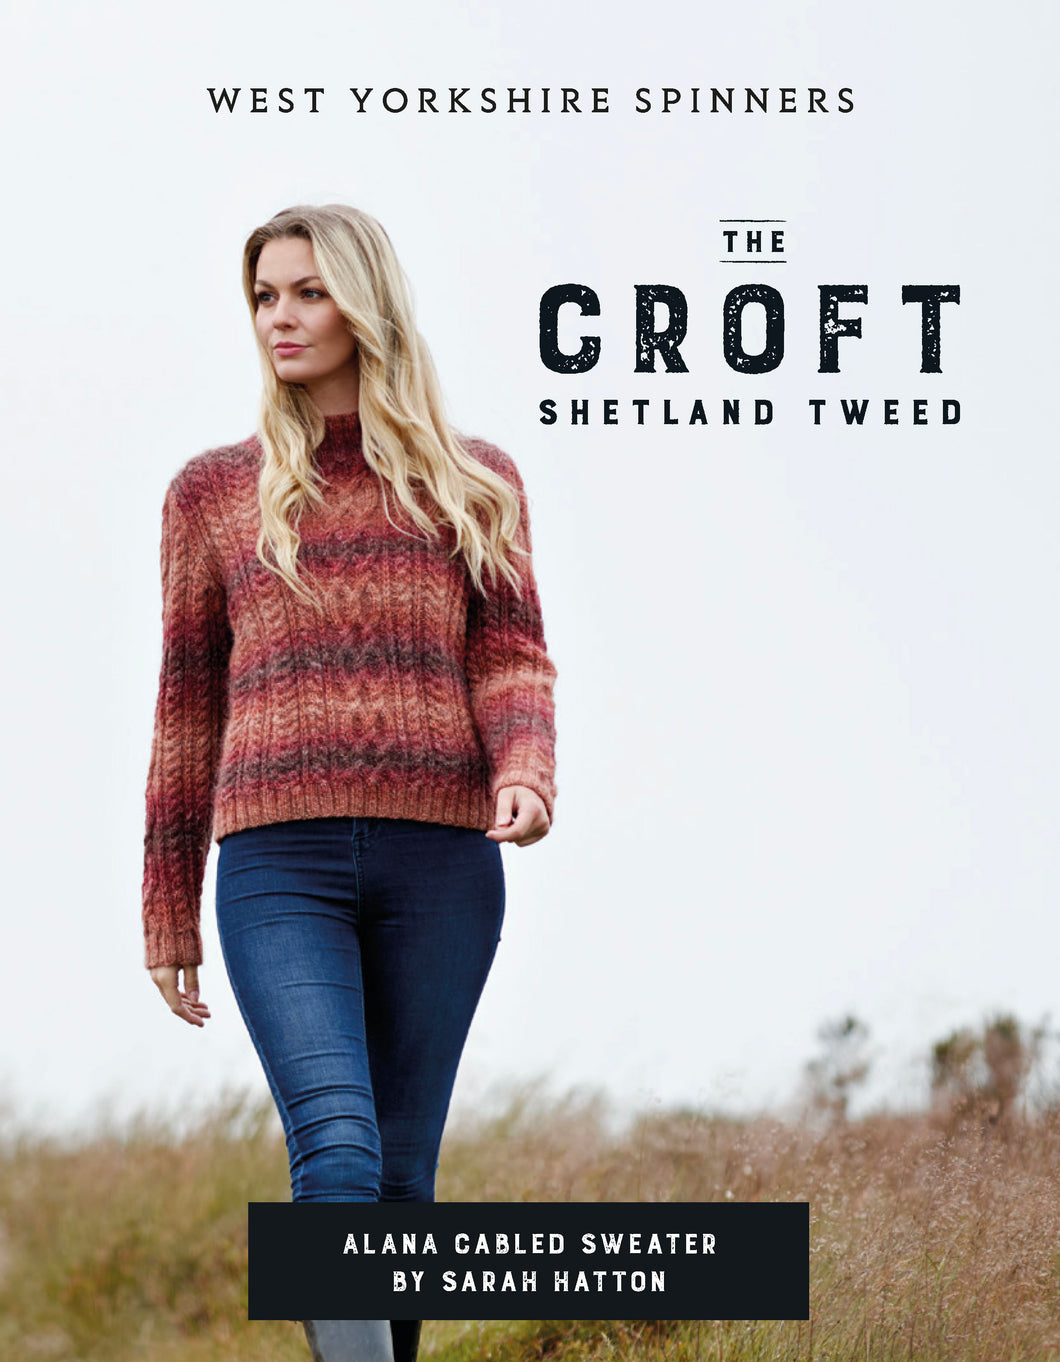 WYS Alana Cabled Sweater by Sarah Hatton